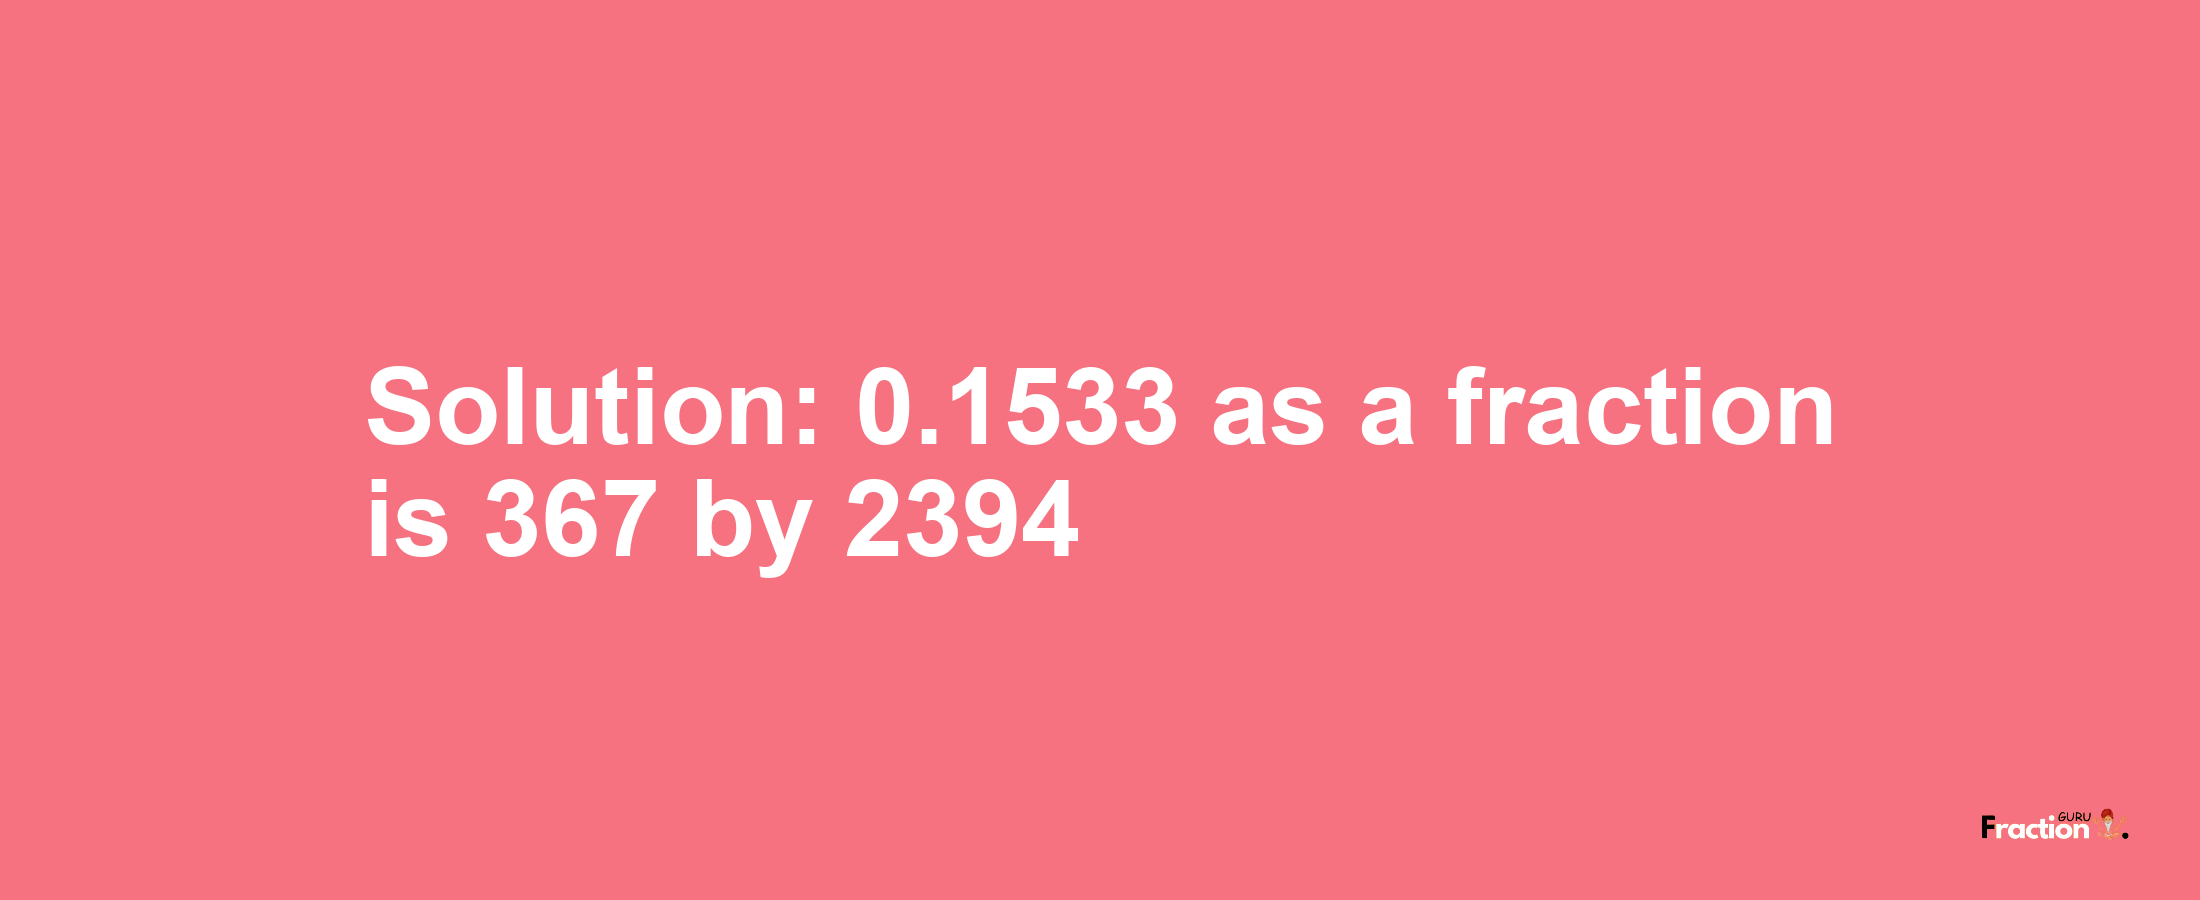 Solution:0.1533 as a fraction is 367/2394